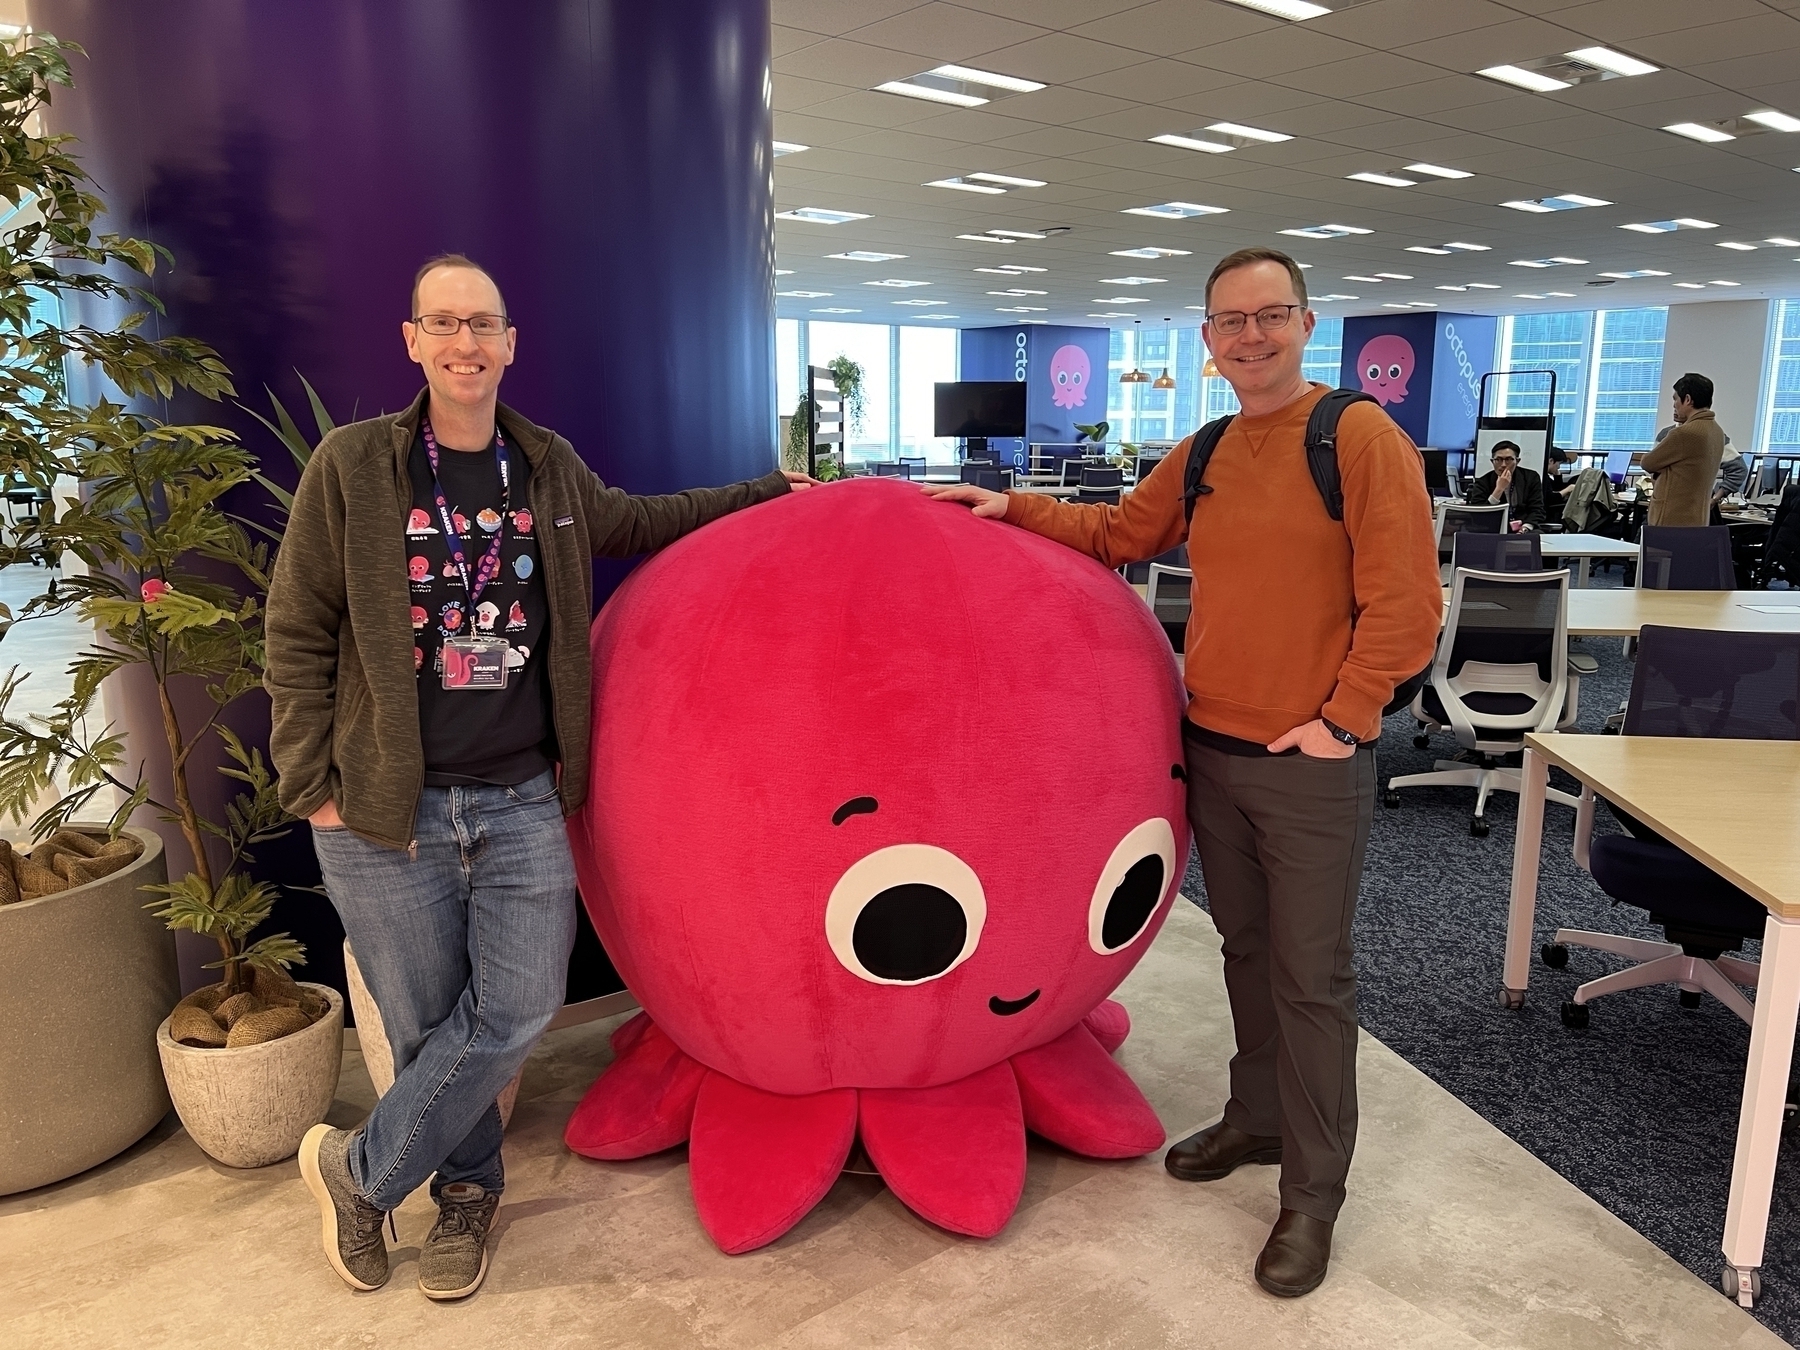 James and Chad pose with Constantine, a 1.5m tall pink octopus plushie that is the mascot of octopus energy